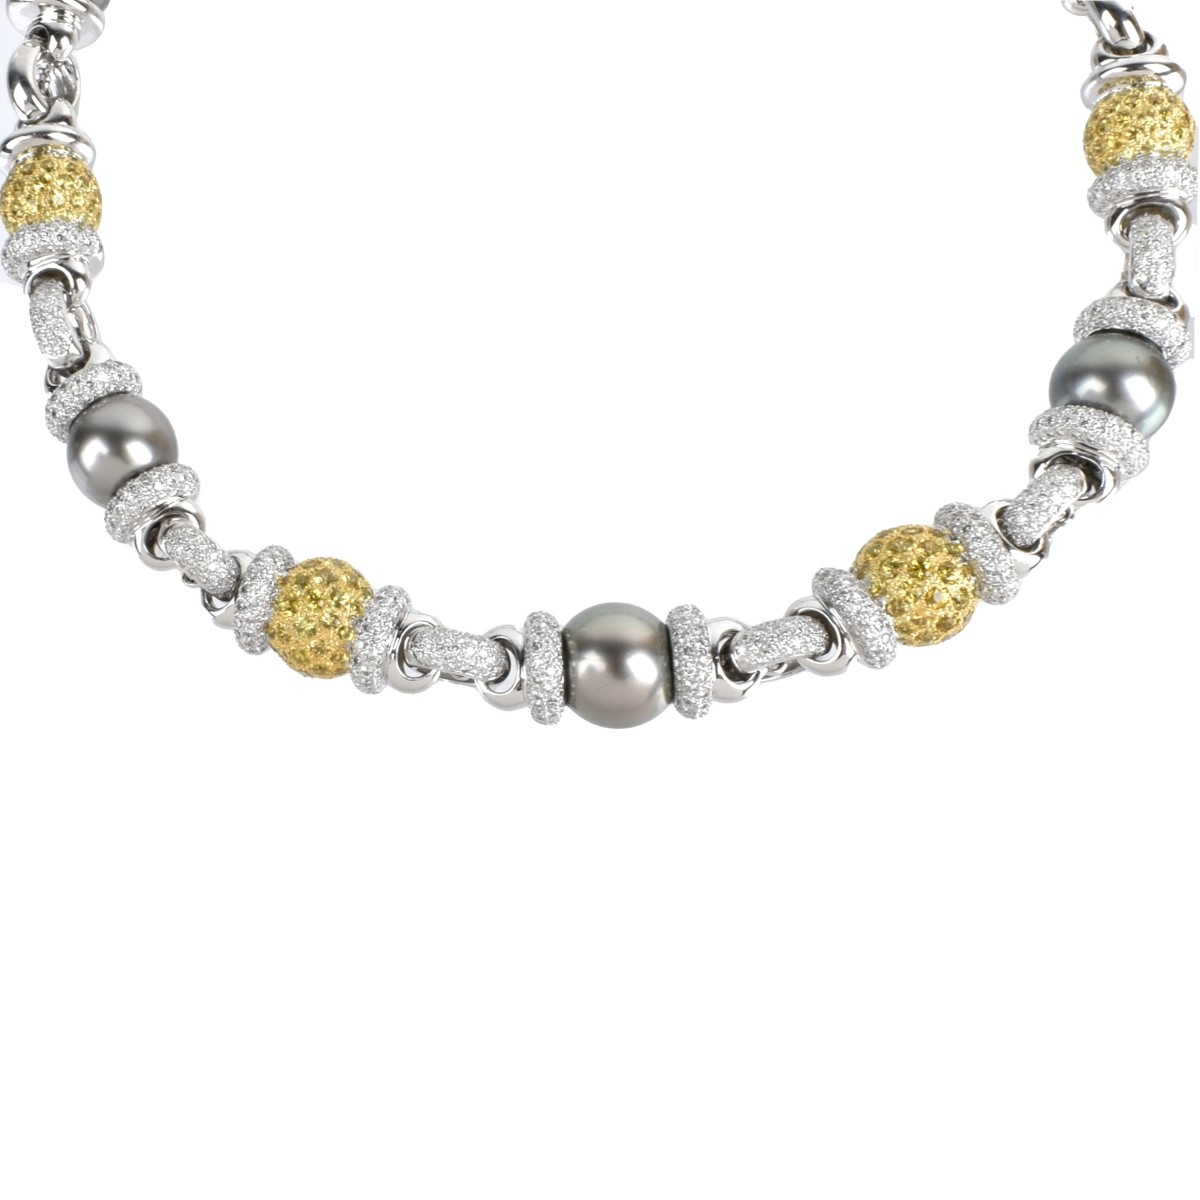 Diamond, Sapphire, Pearl and 18K Necklace